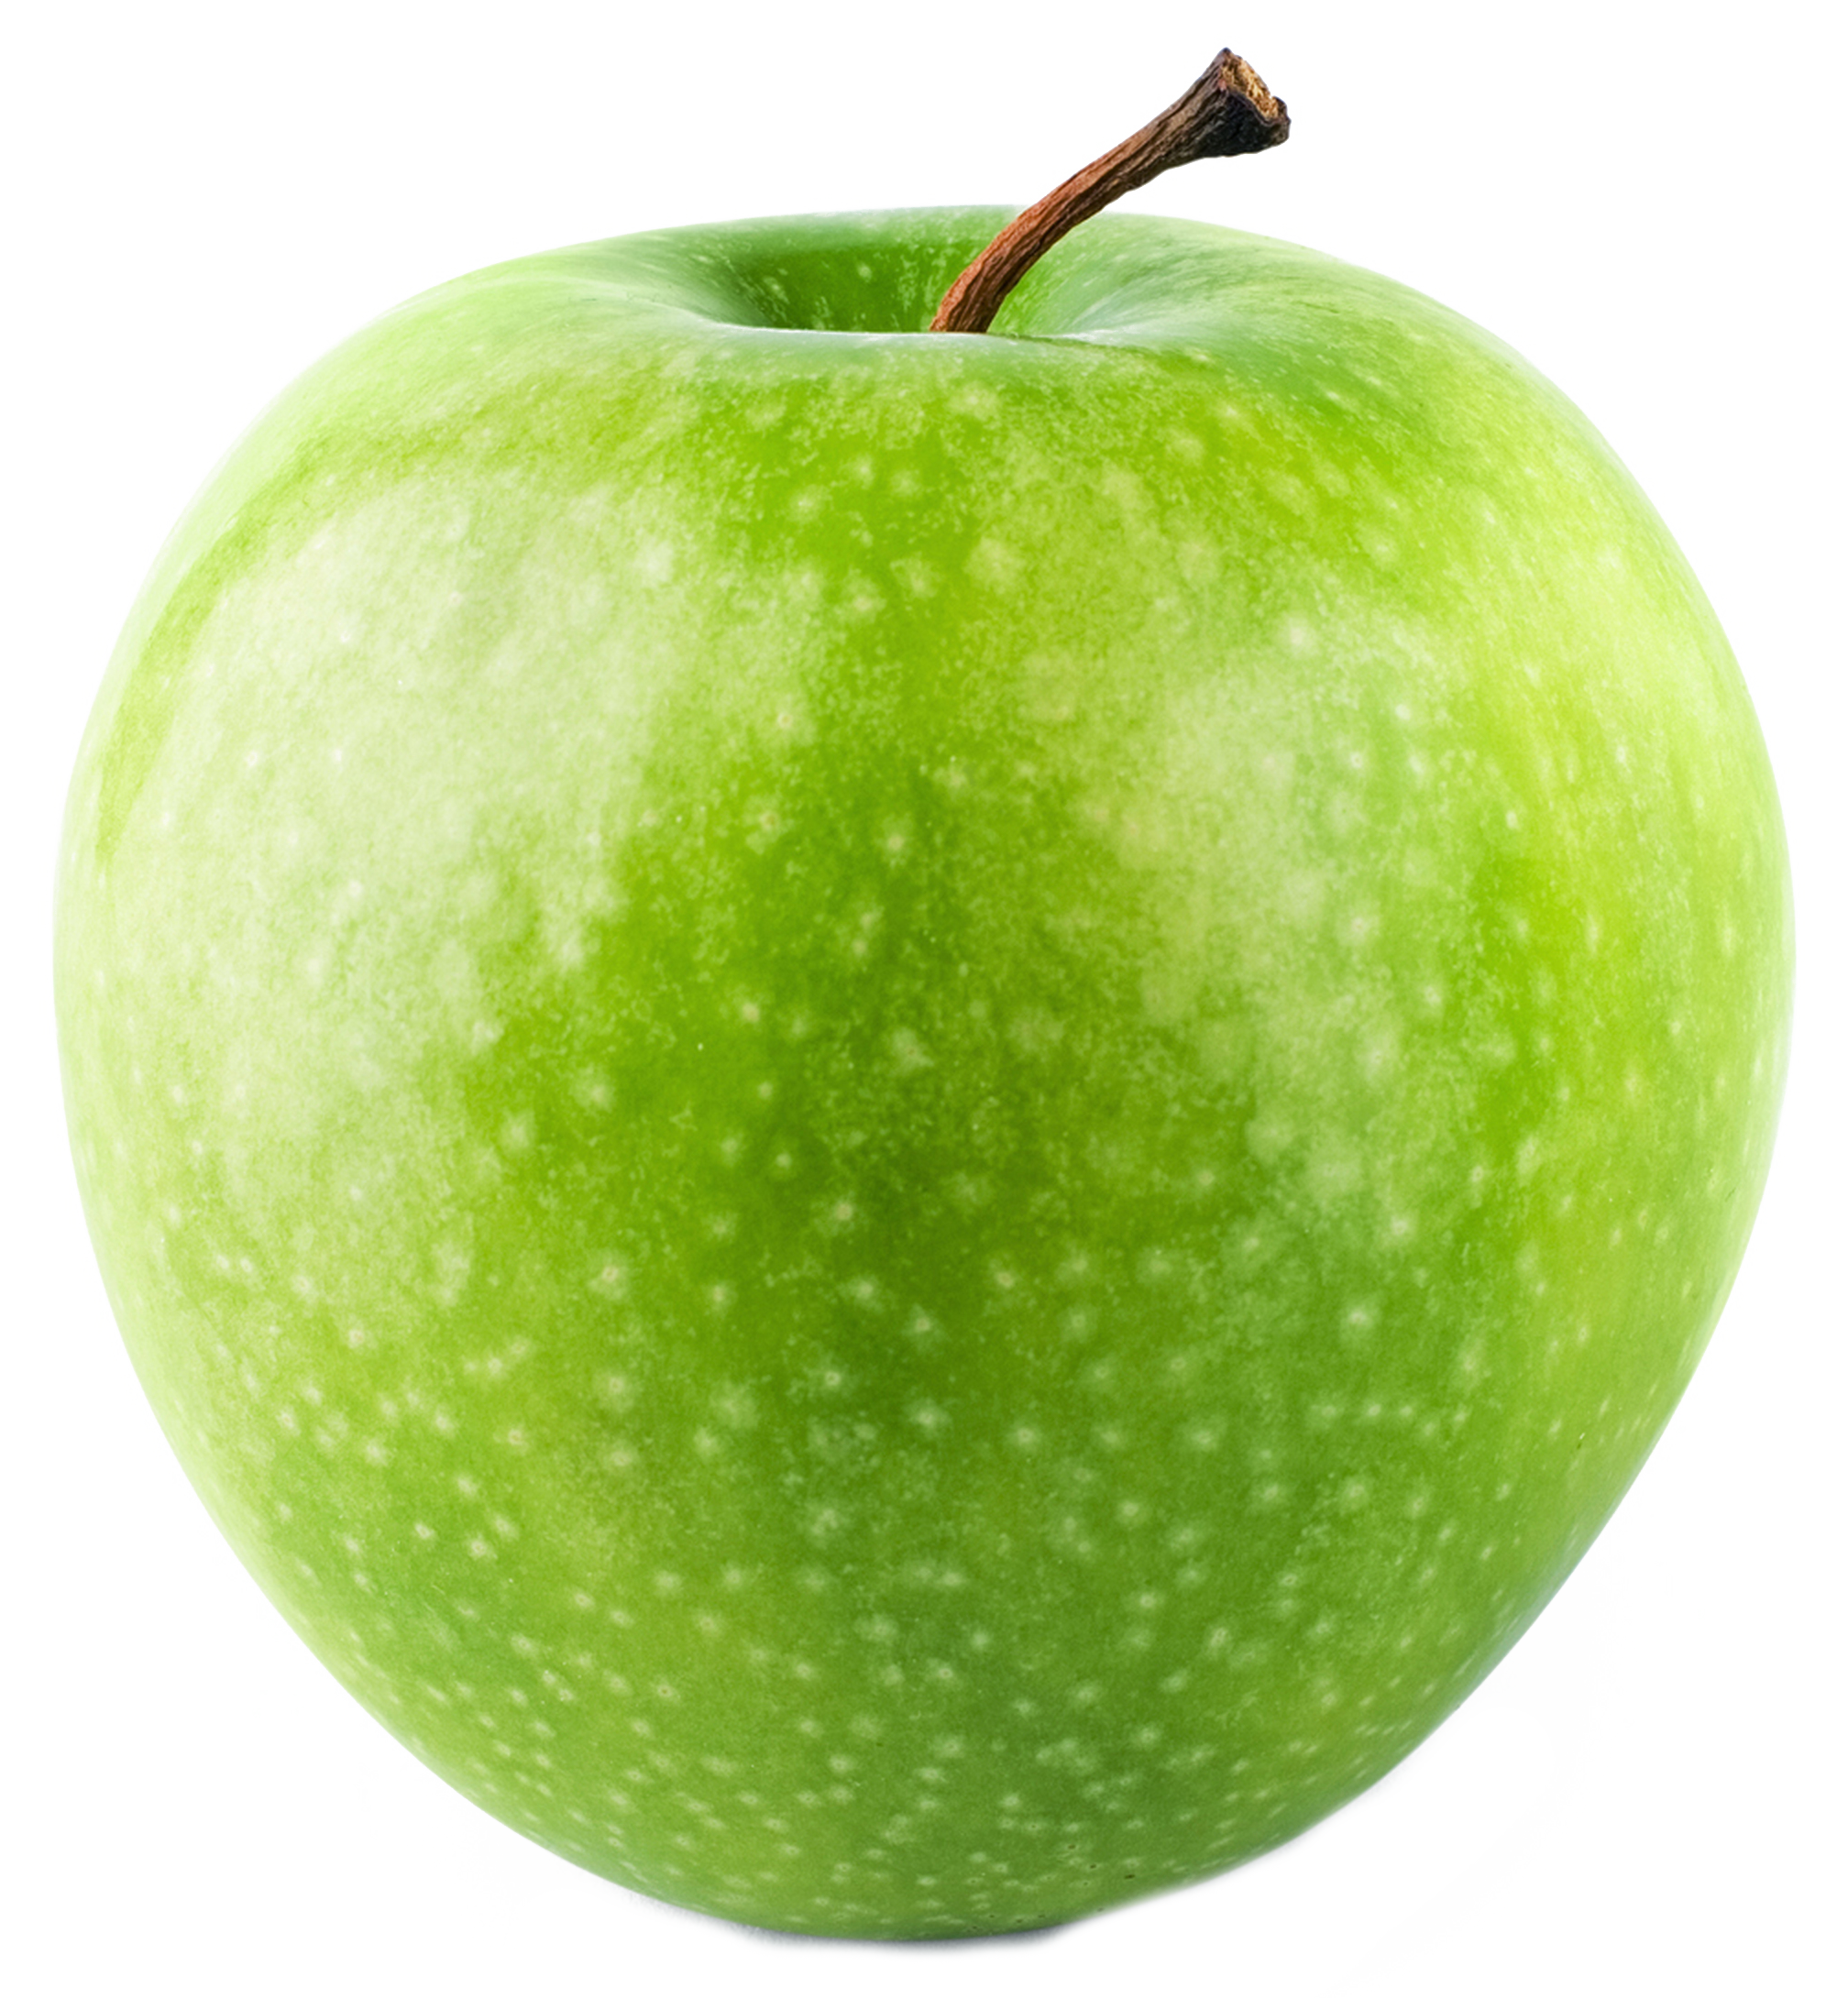 https://gallery.yopriceville.com/var/albums/Free-Clipart-Pictures/Fruit-PNG/Large_Green_Apple_PNG_Clipart.png?m=1434276911